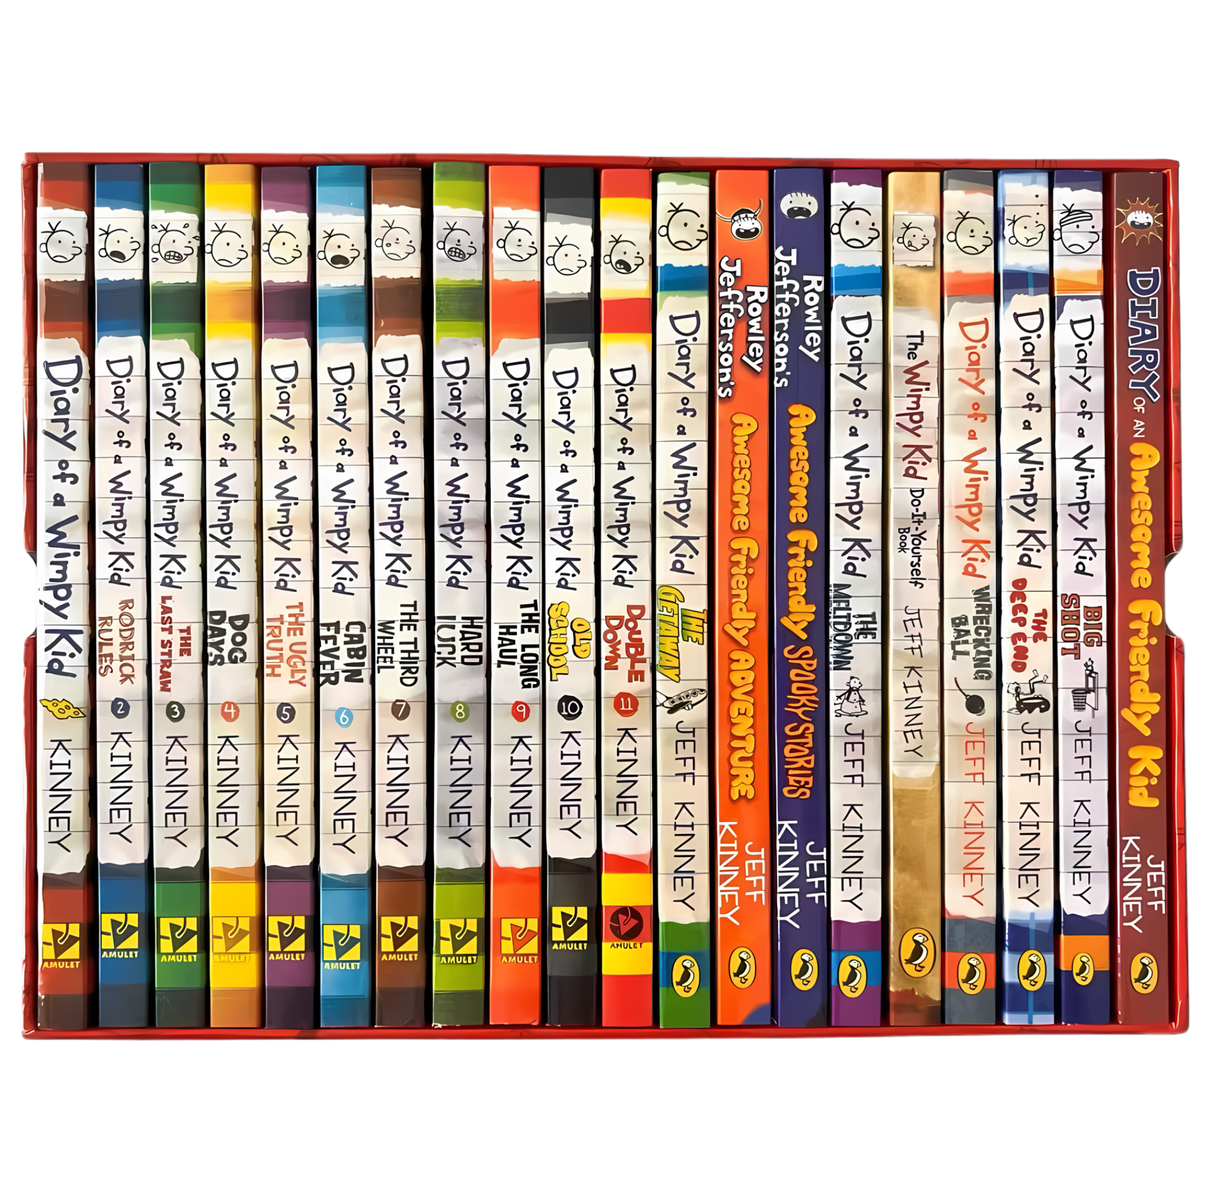 Diary of a Wimpy Kid 1-20 Books Complete Collection Boxed Set Paperback